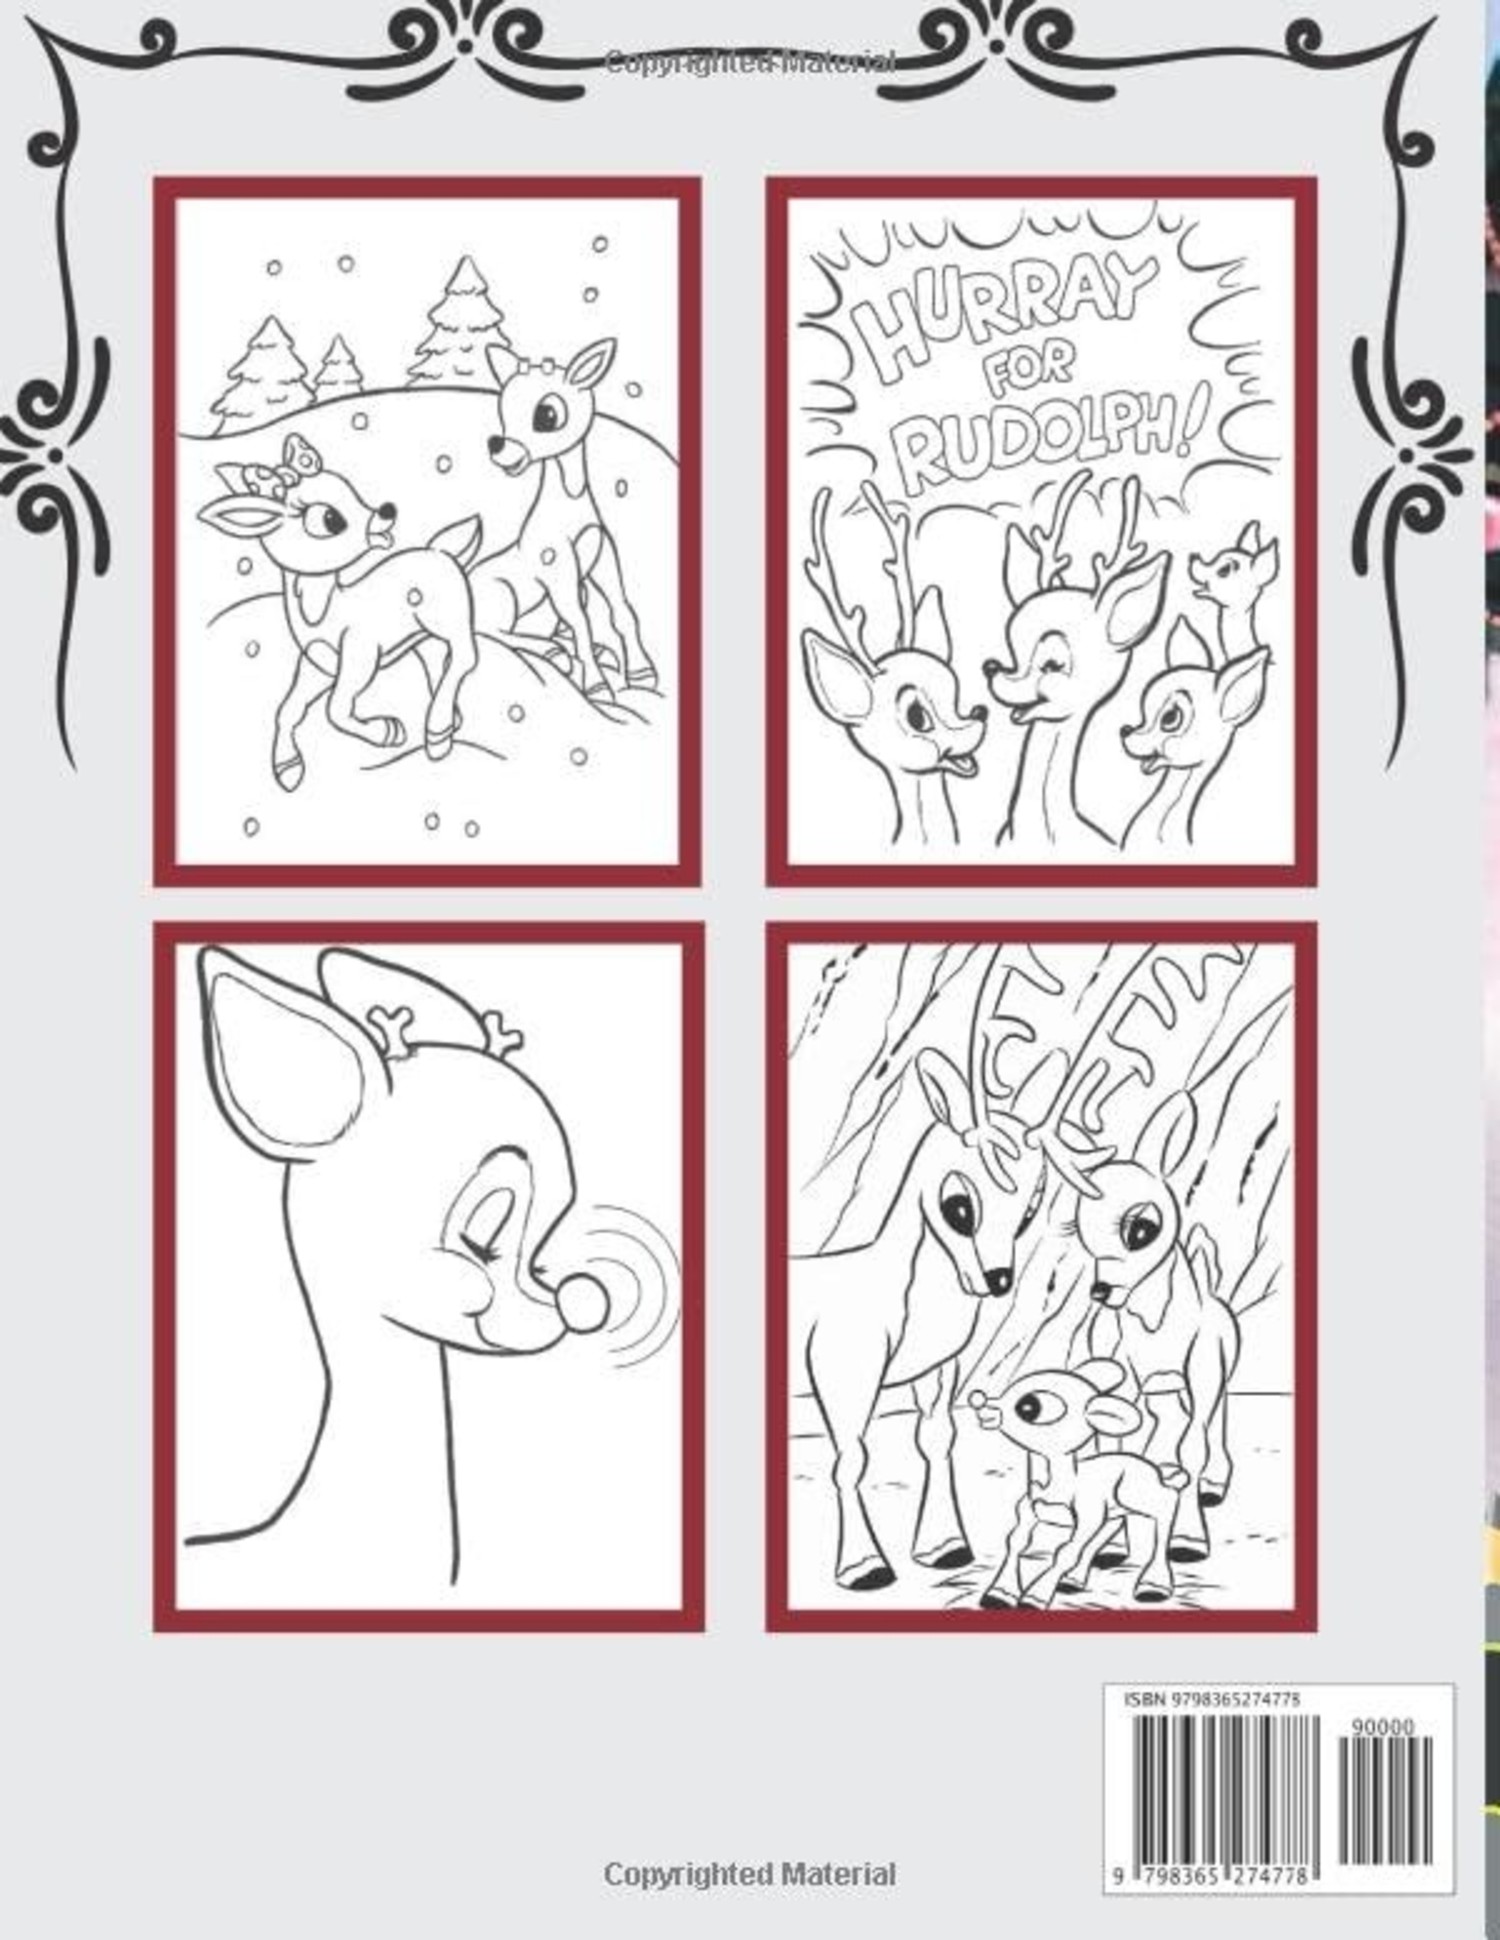 Rudolph the red nosed reindeer coloring book exclusive images activity book for kids with reindeer santa claus elfs and yeti by jason z smither